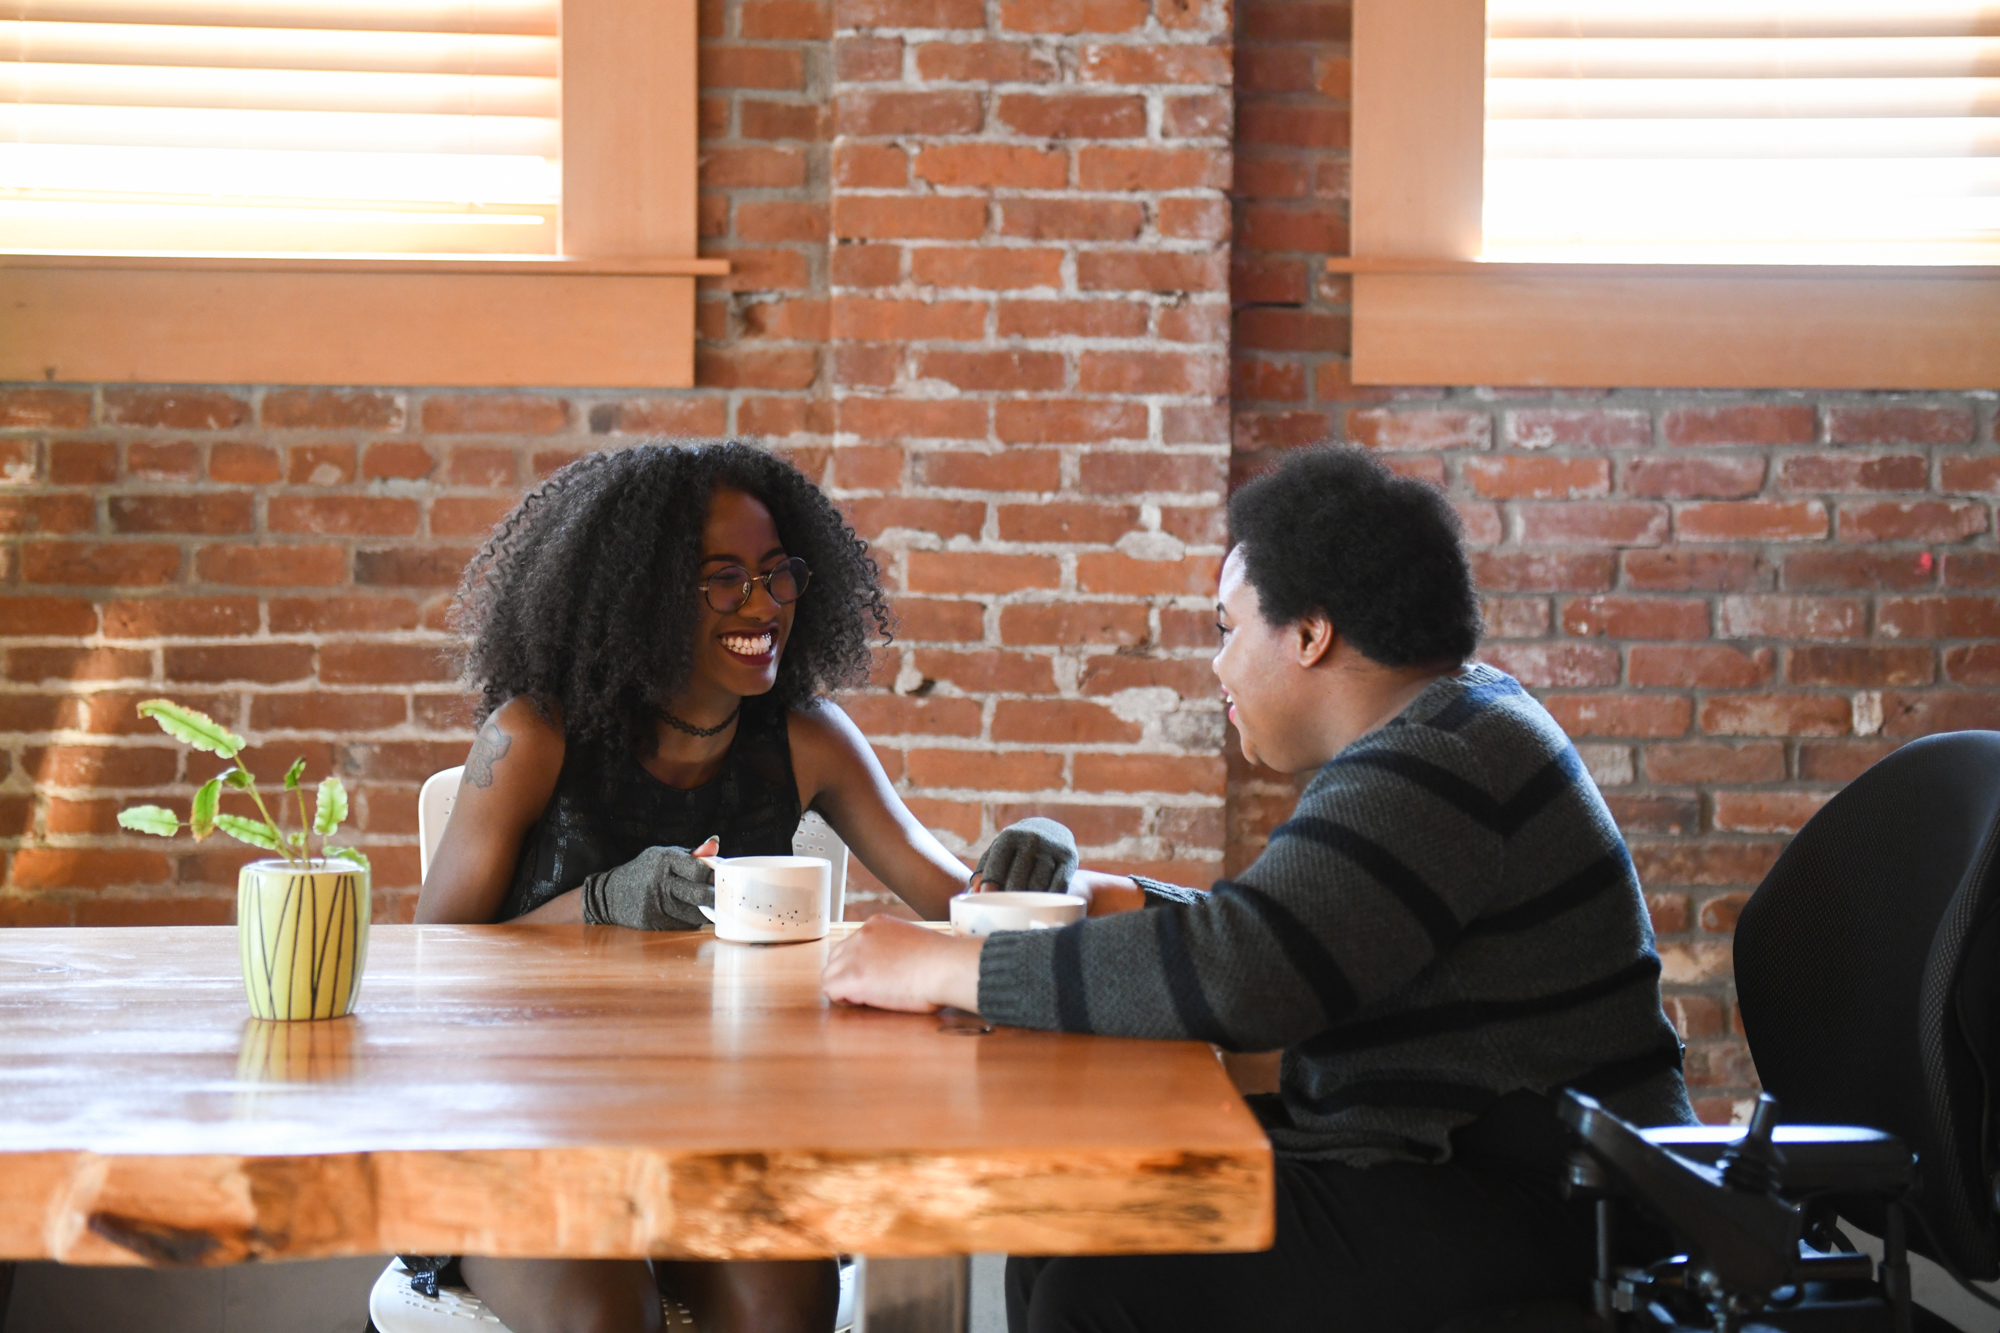 Two disabled Black people (a femme wearing compression gloves and a non-binary person in a power wheelchair that's partially in view) sit across each other and laugh while on a coffee date in a brick building.